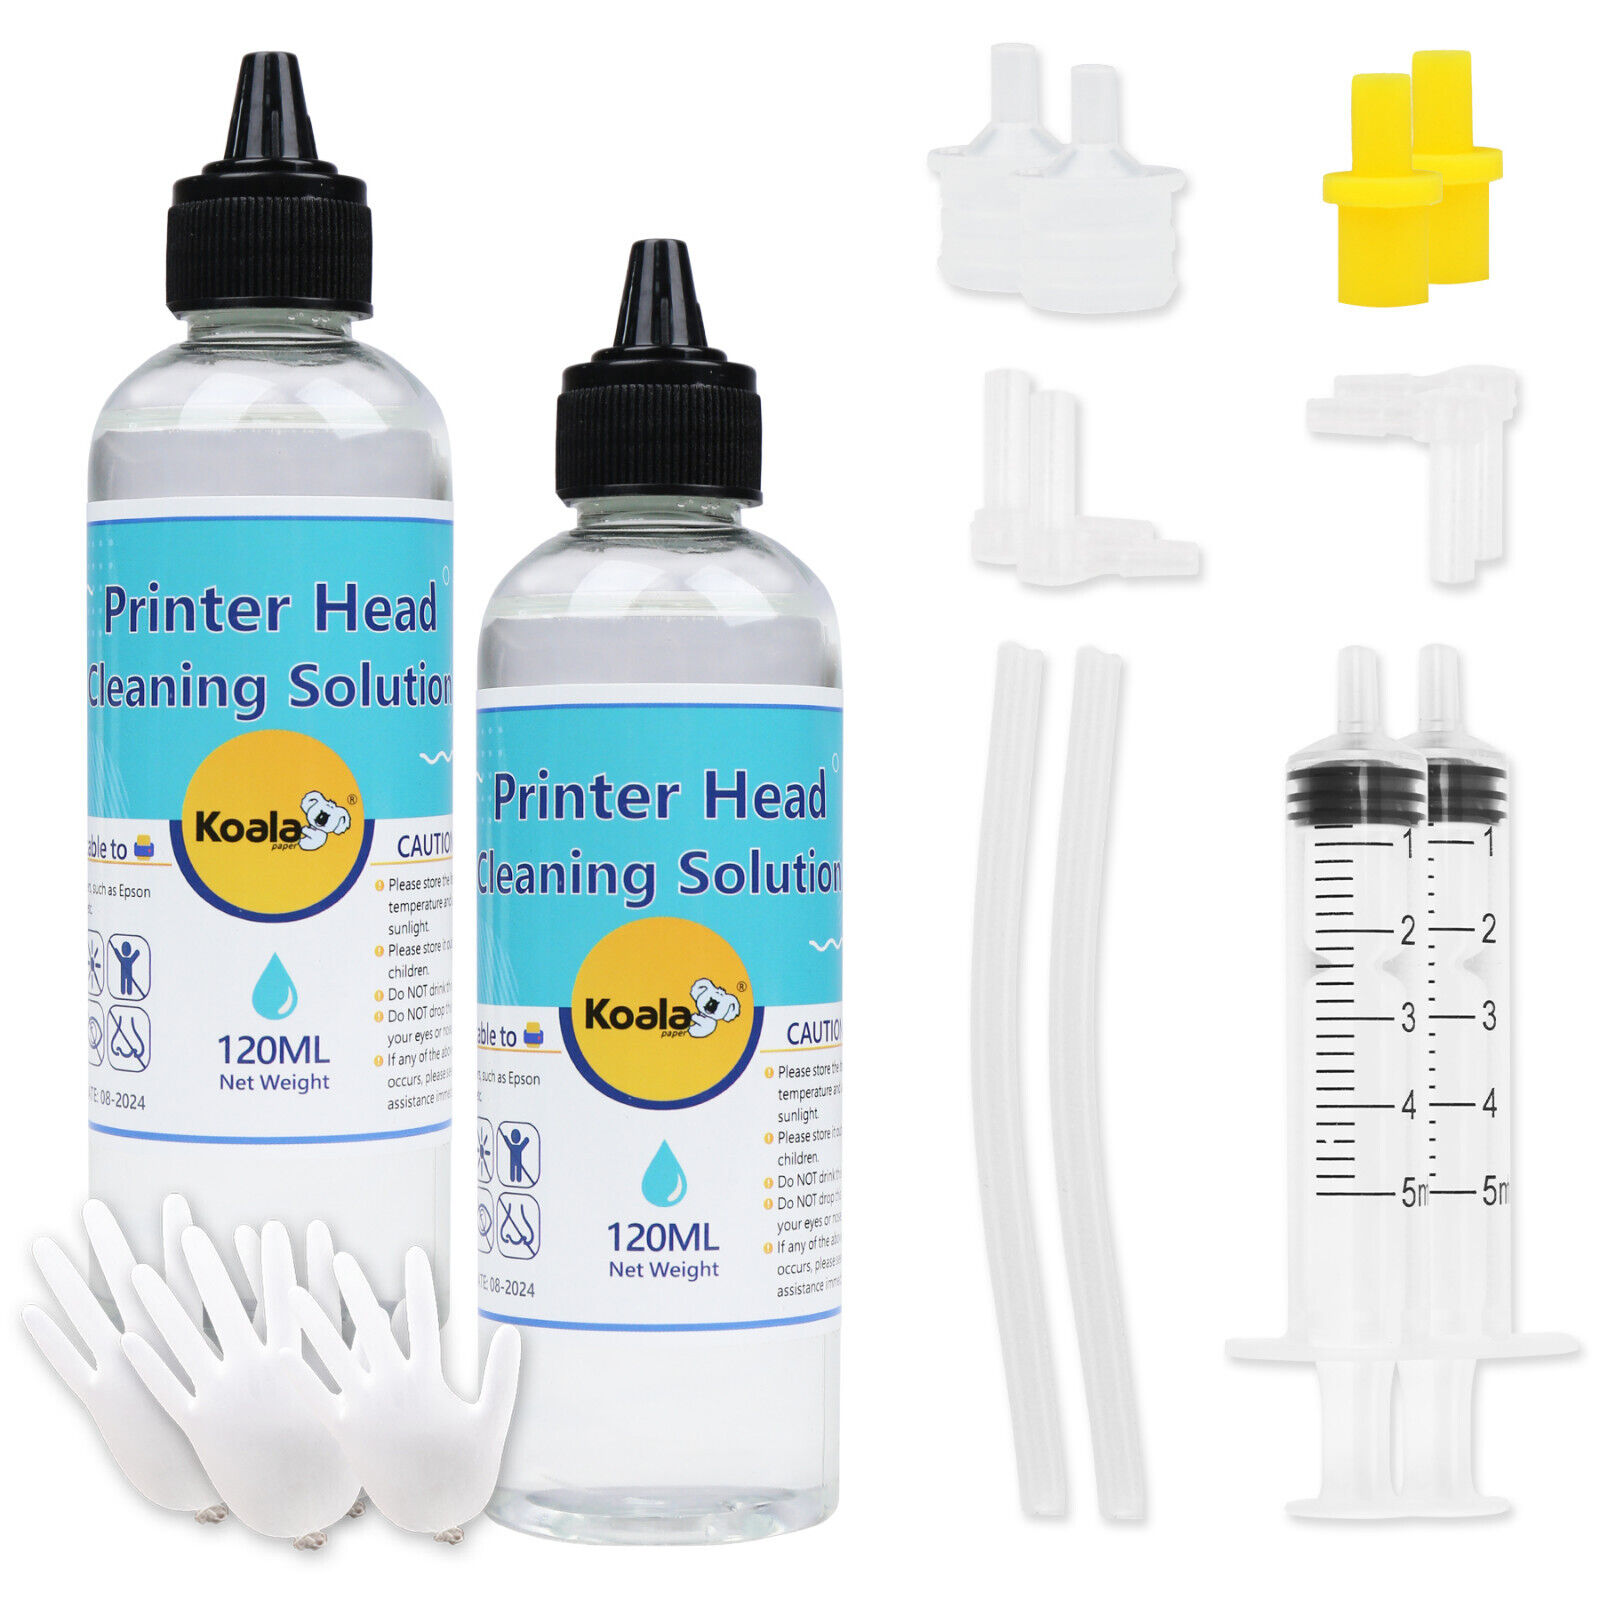 Epson Printer Head Cleaning Kit 240ML Cleaner Solution Flush HP Canon Brother